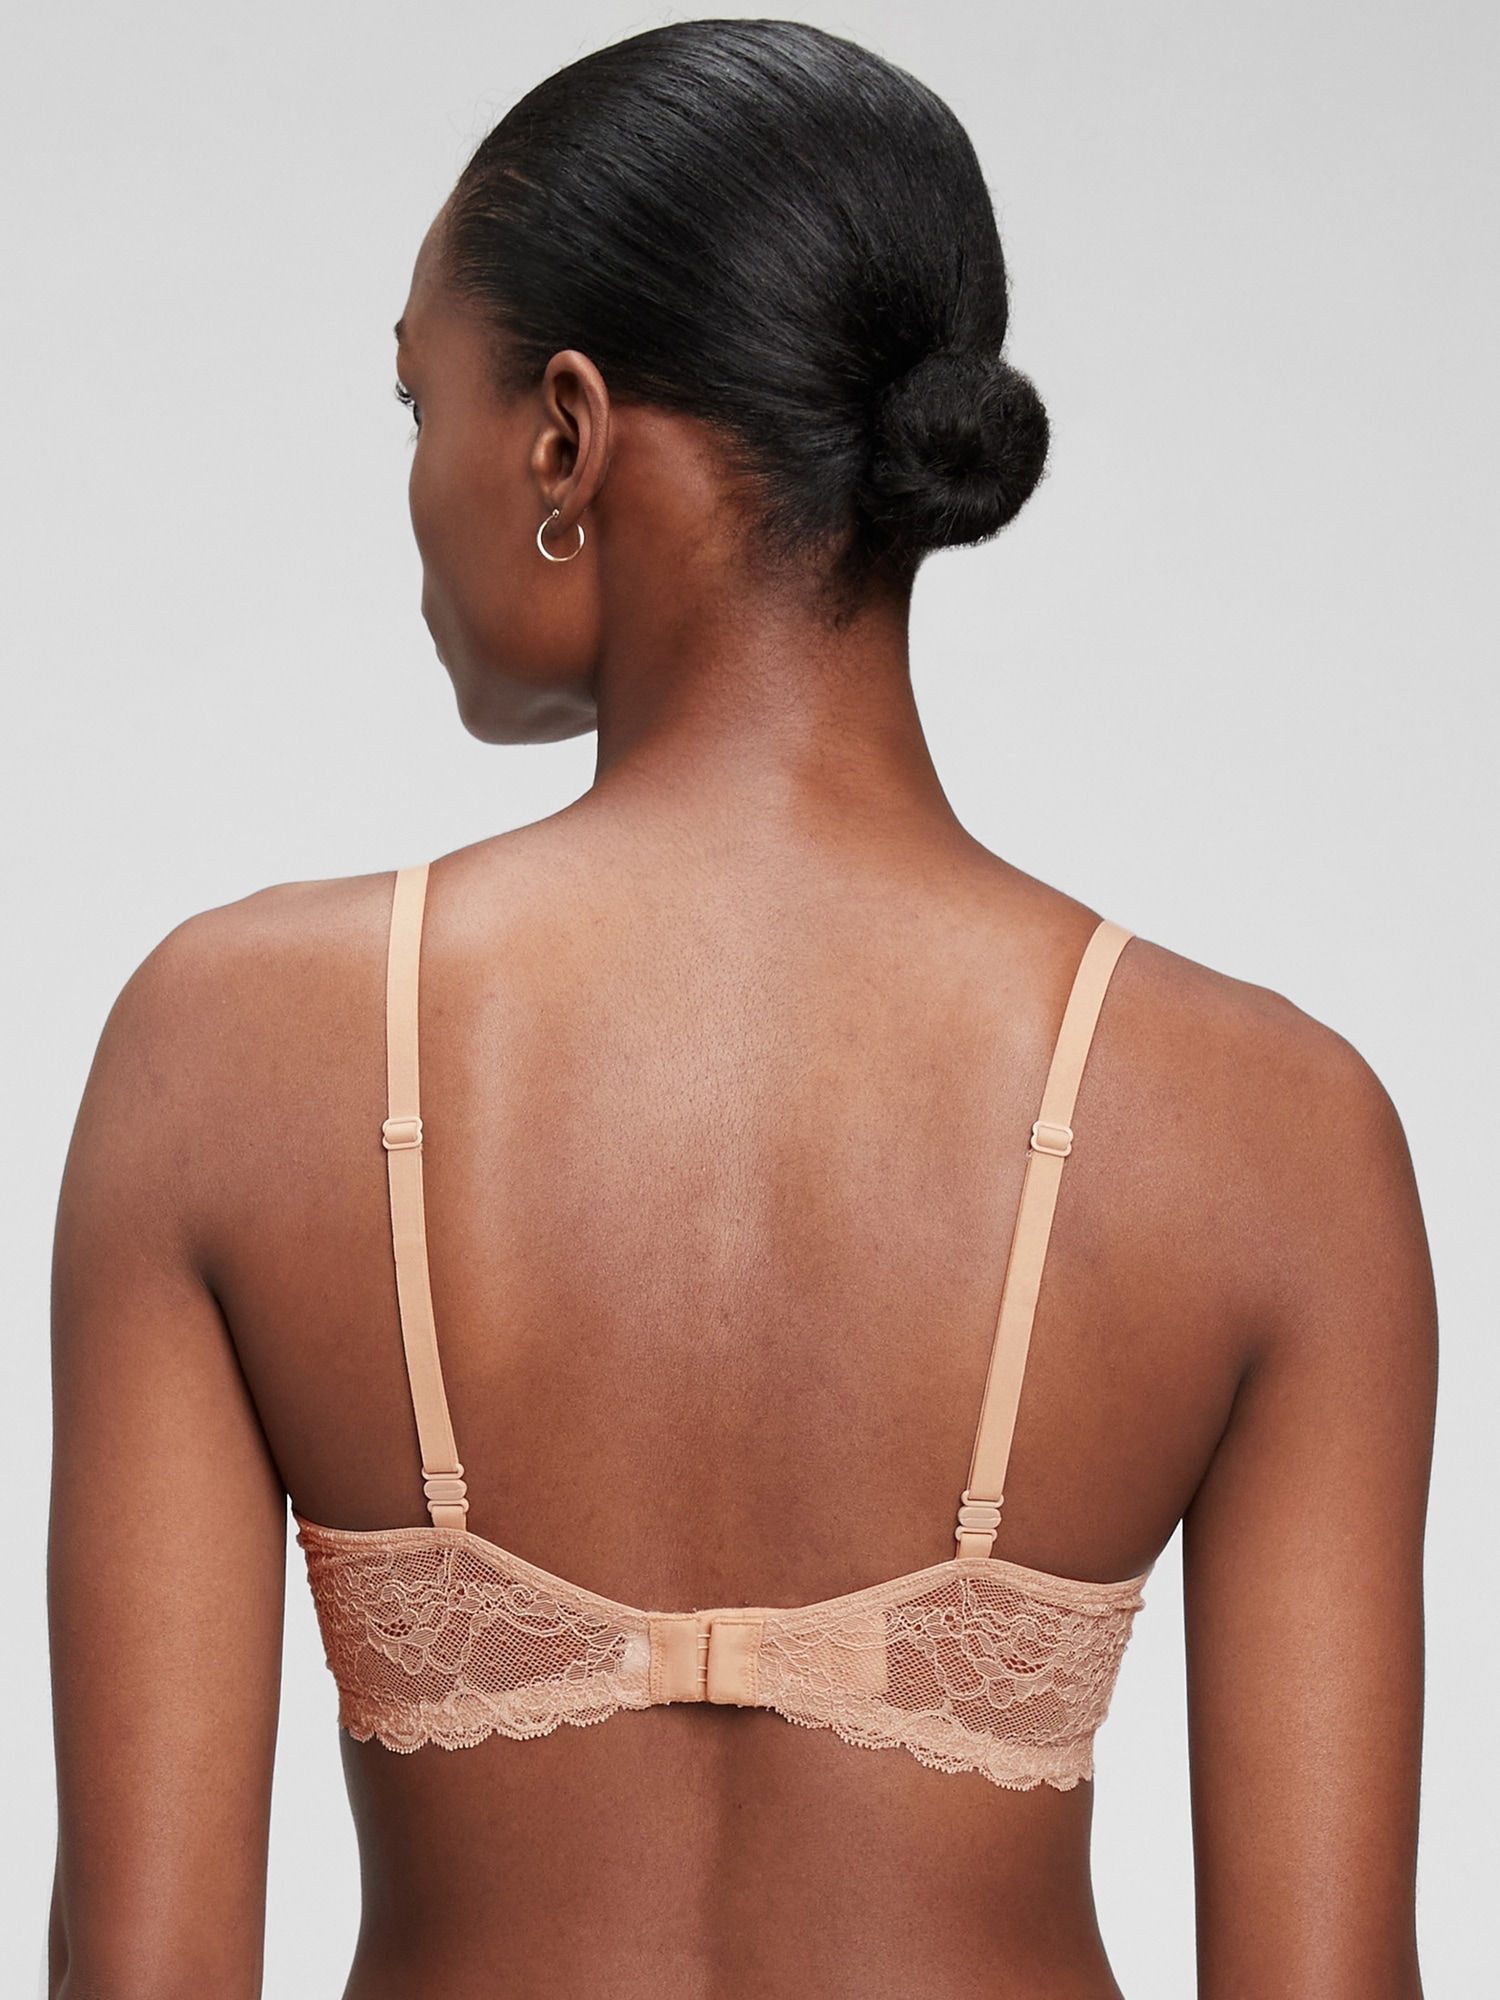 Where to Buy the Best Support Lace Bras?